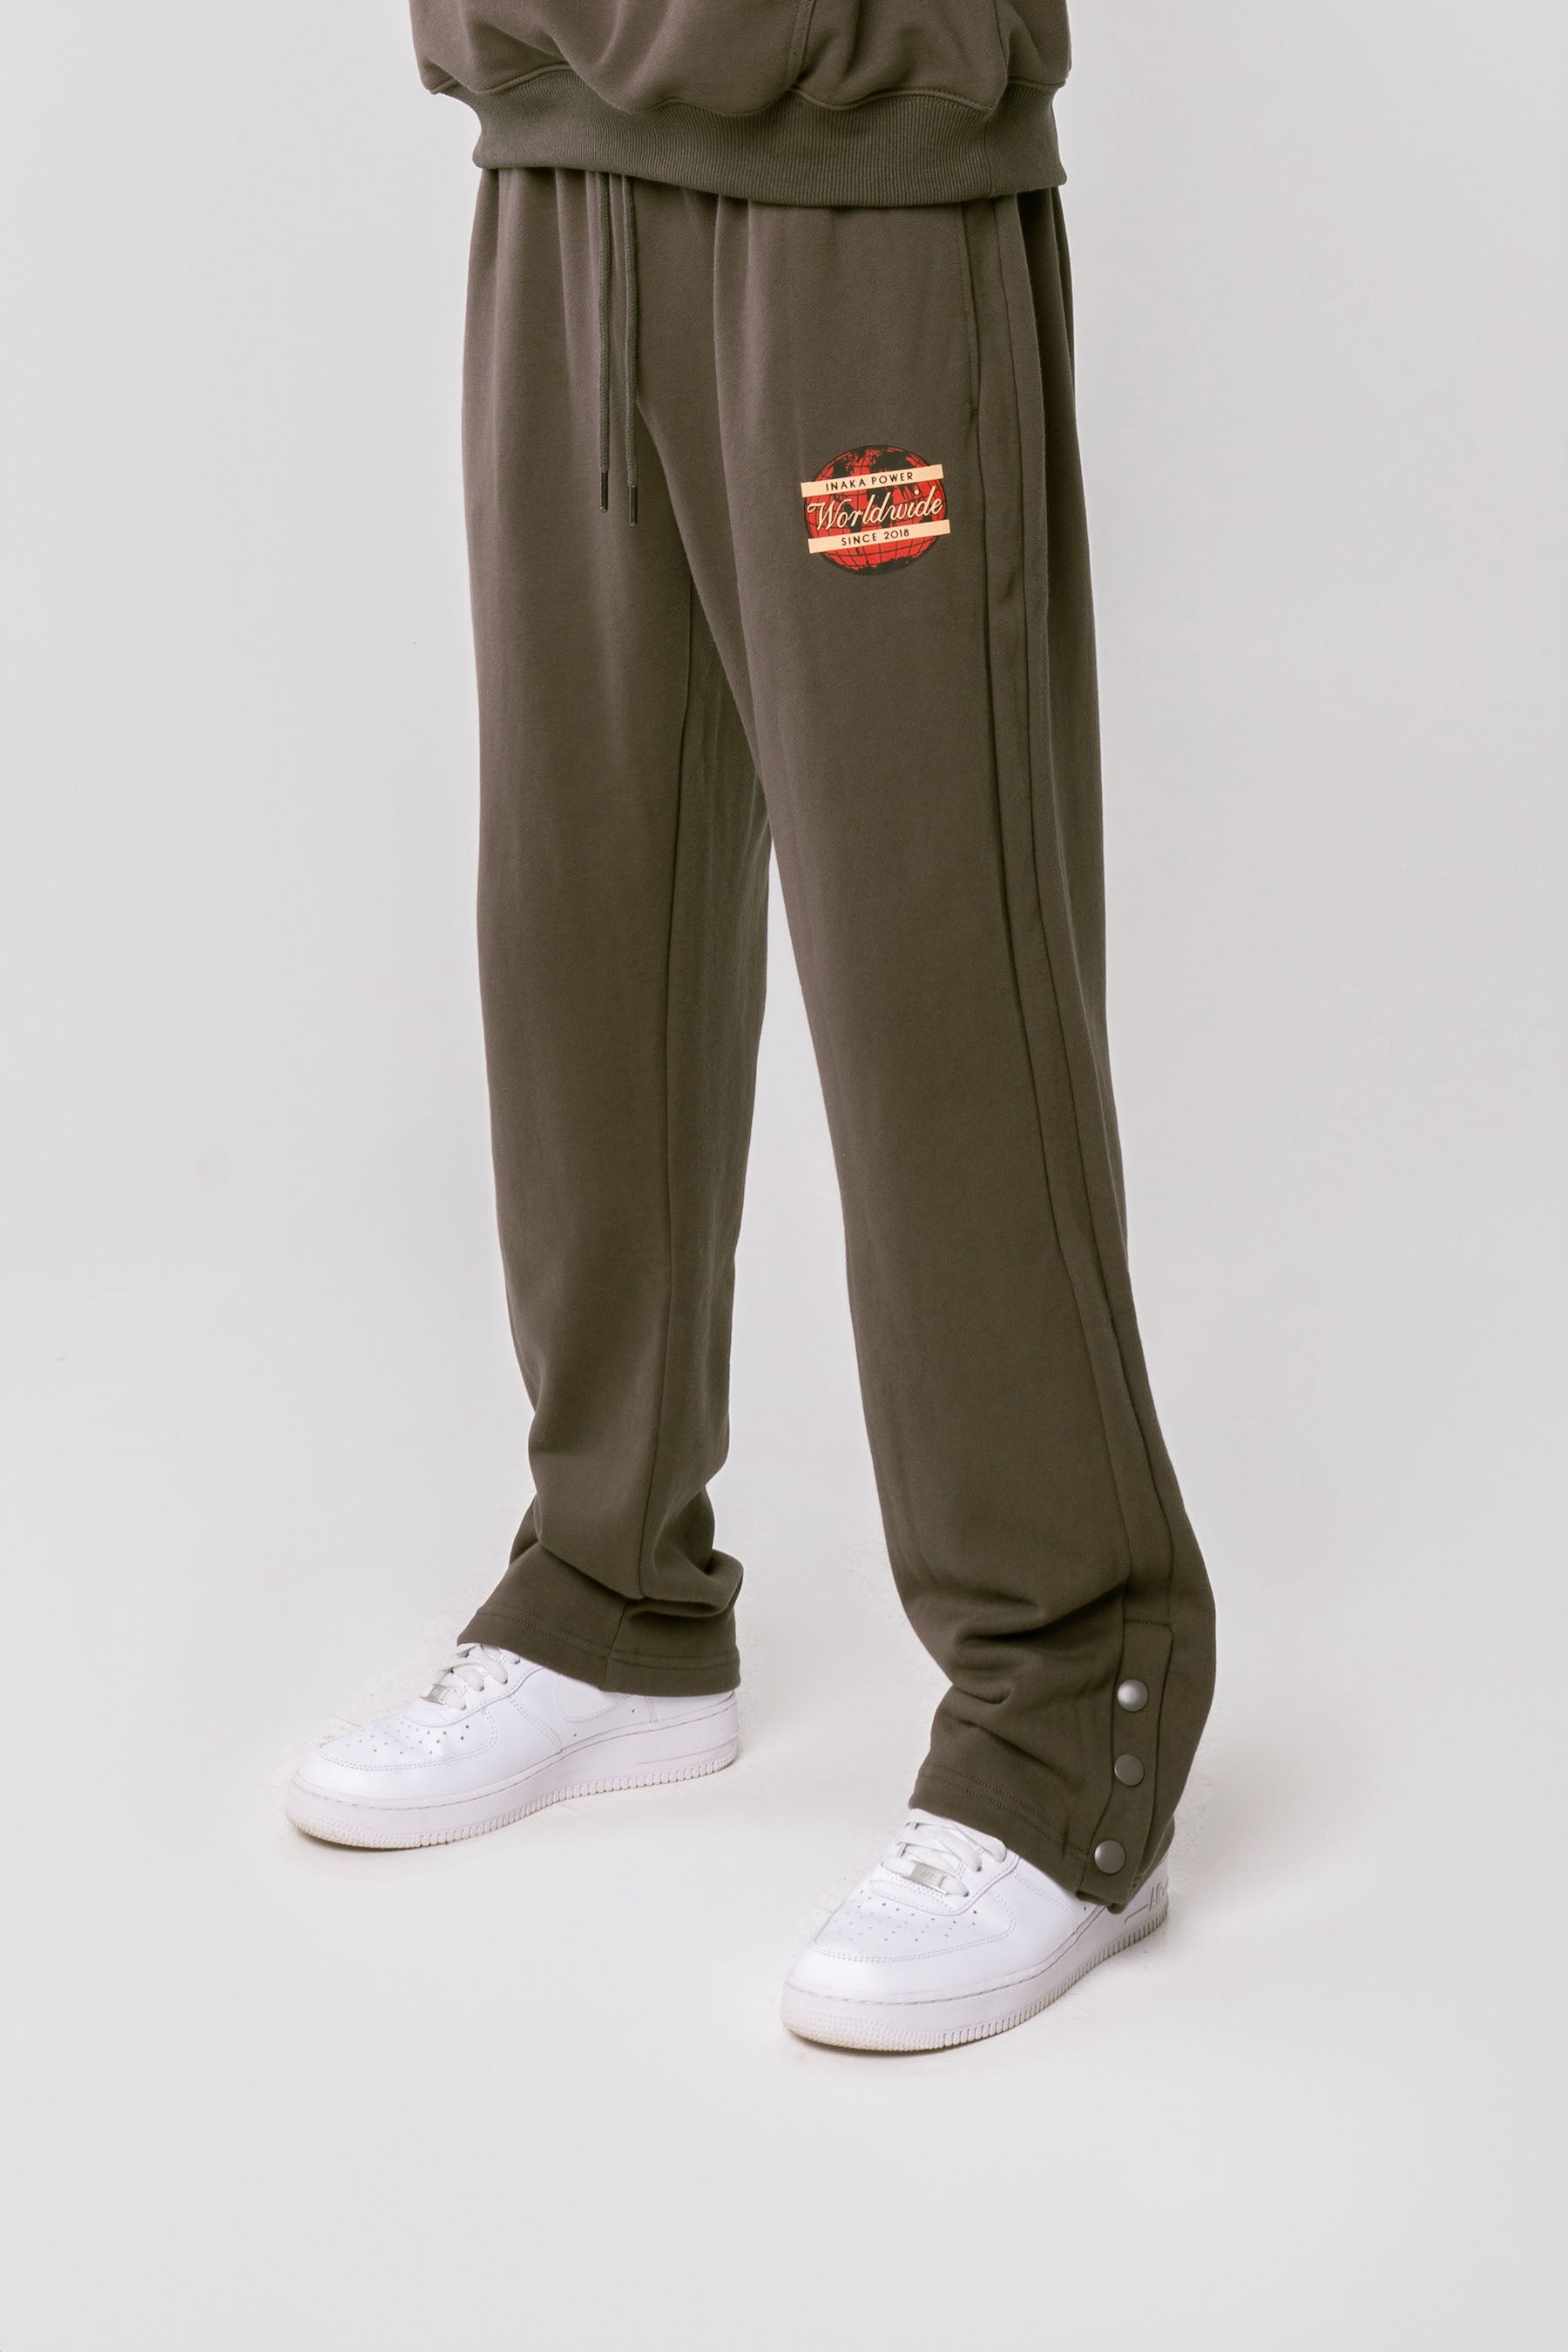 EST. Relaxed Sweats - Charcoal